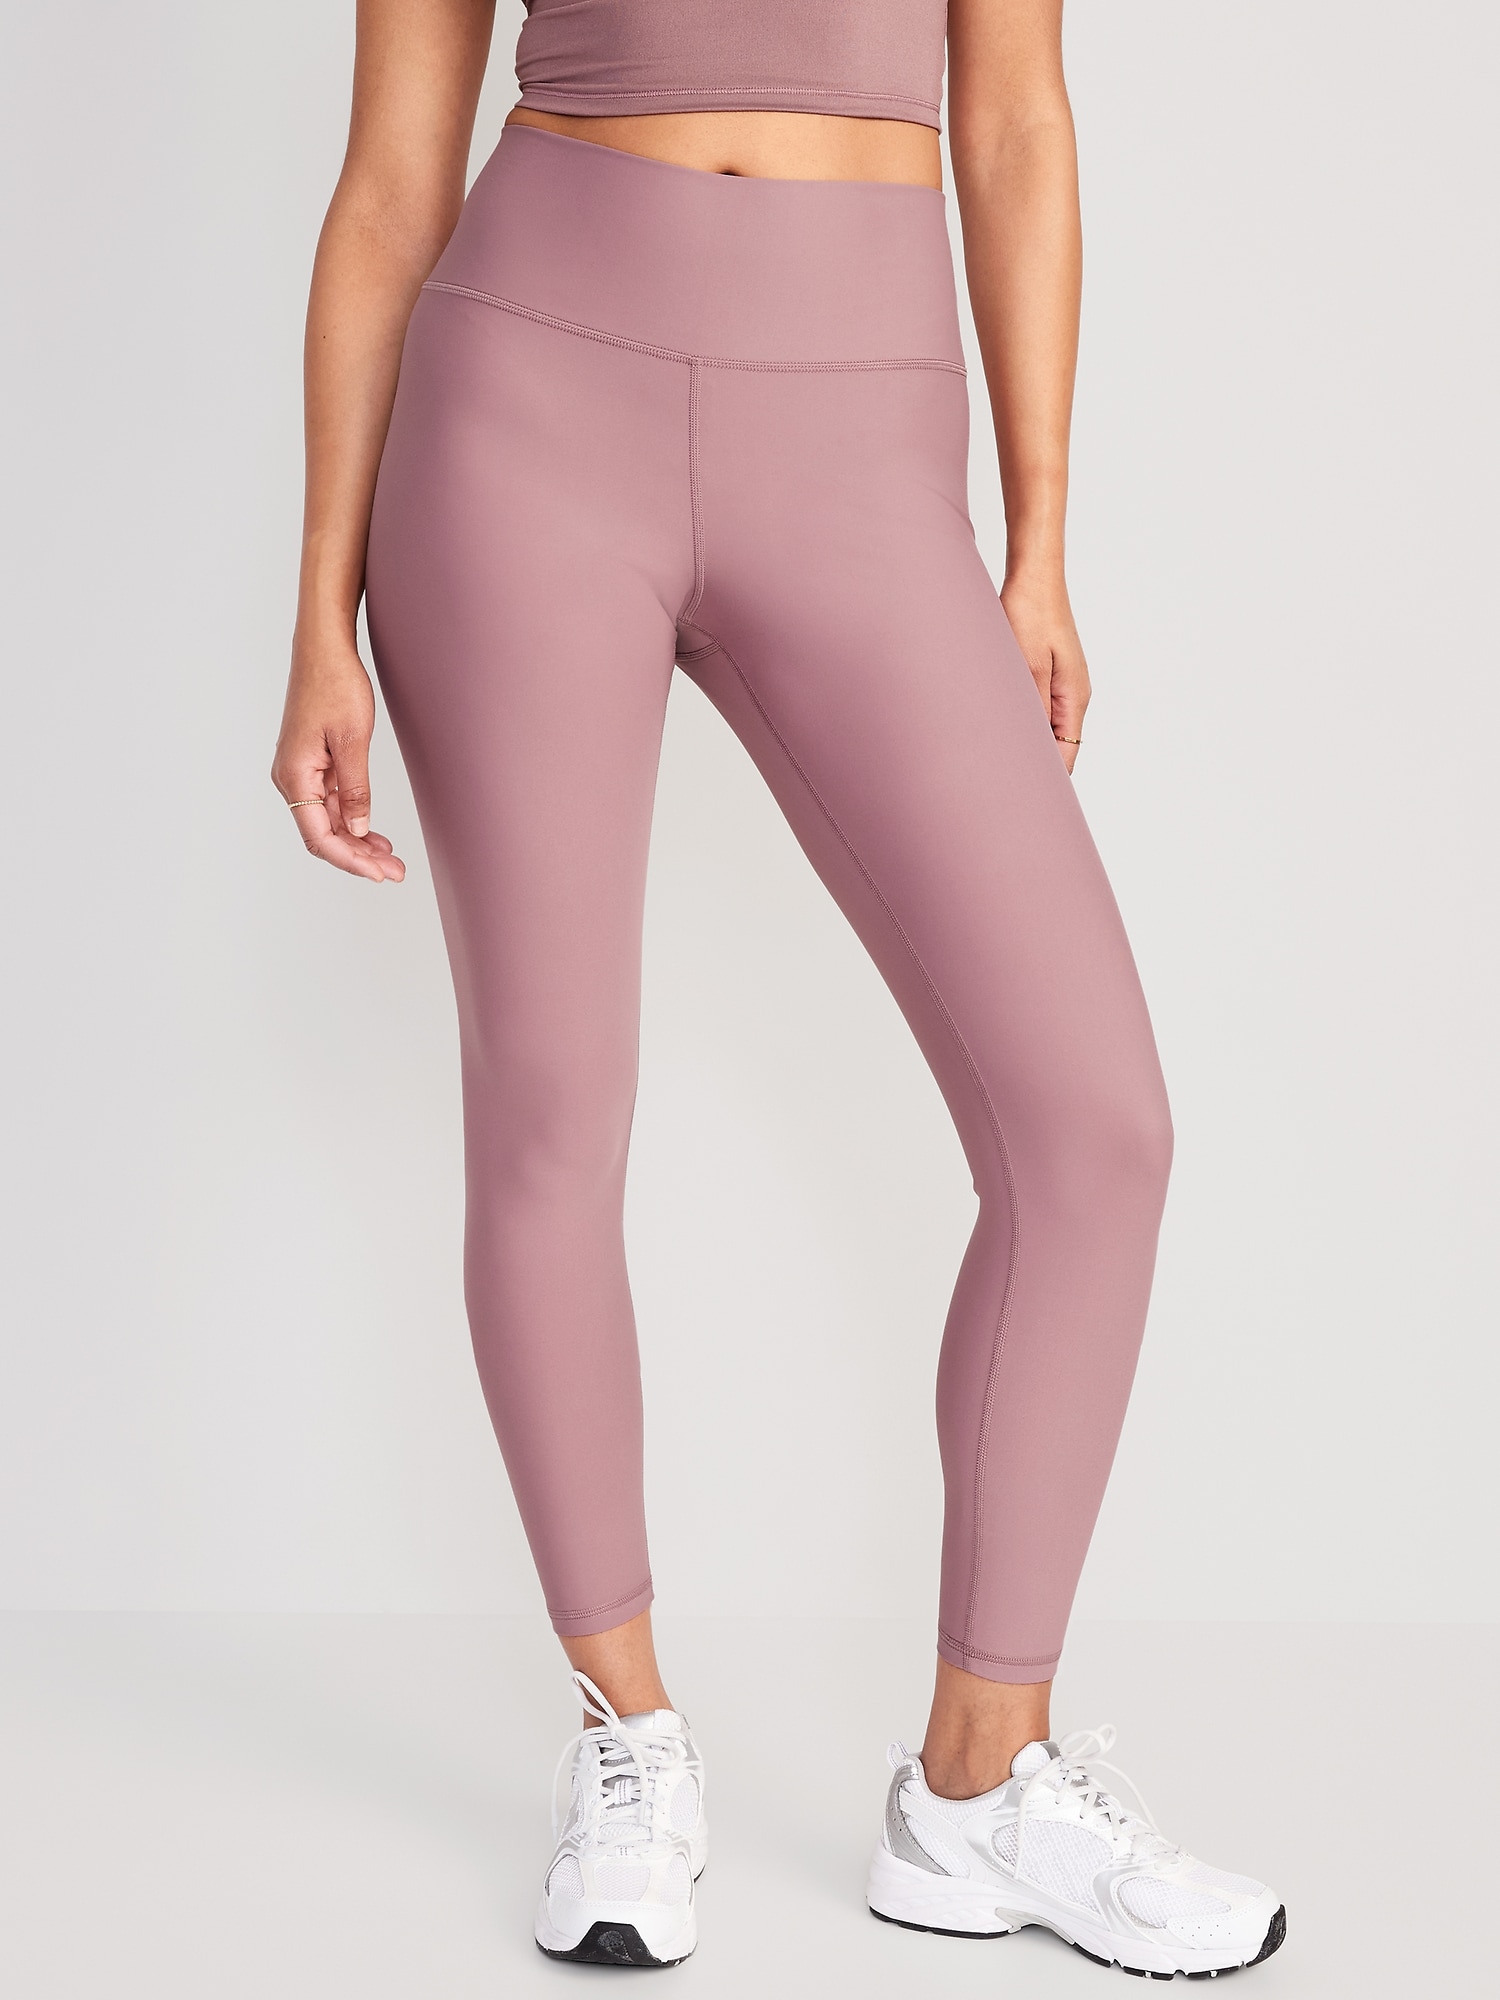 Old Navy - High-Waisted PowerSoft 7/8-Length Leggings for Women pink